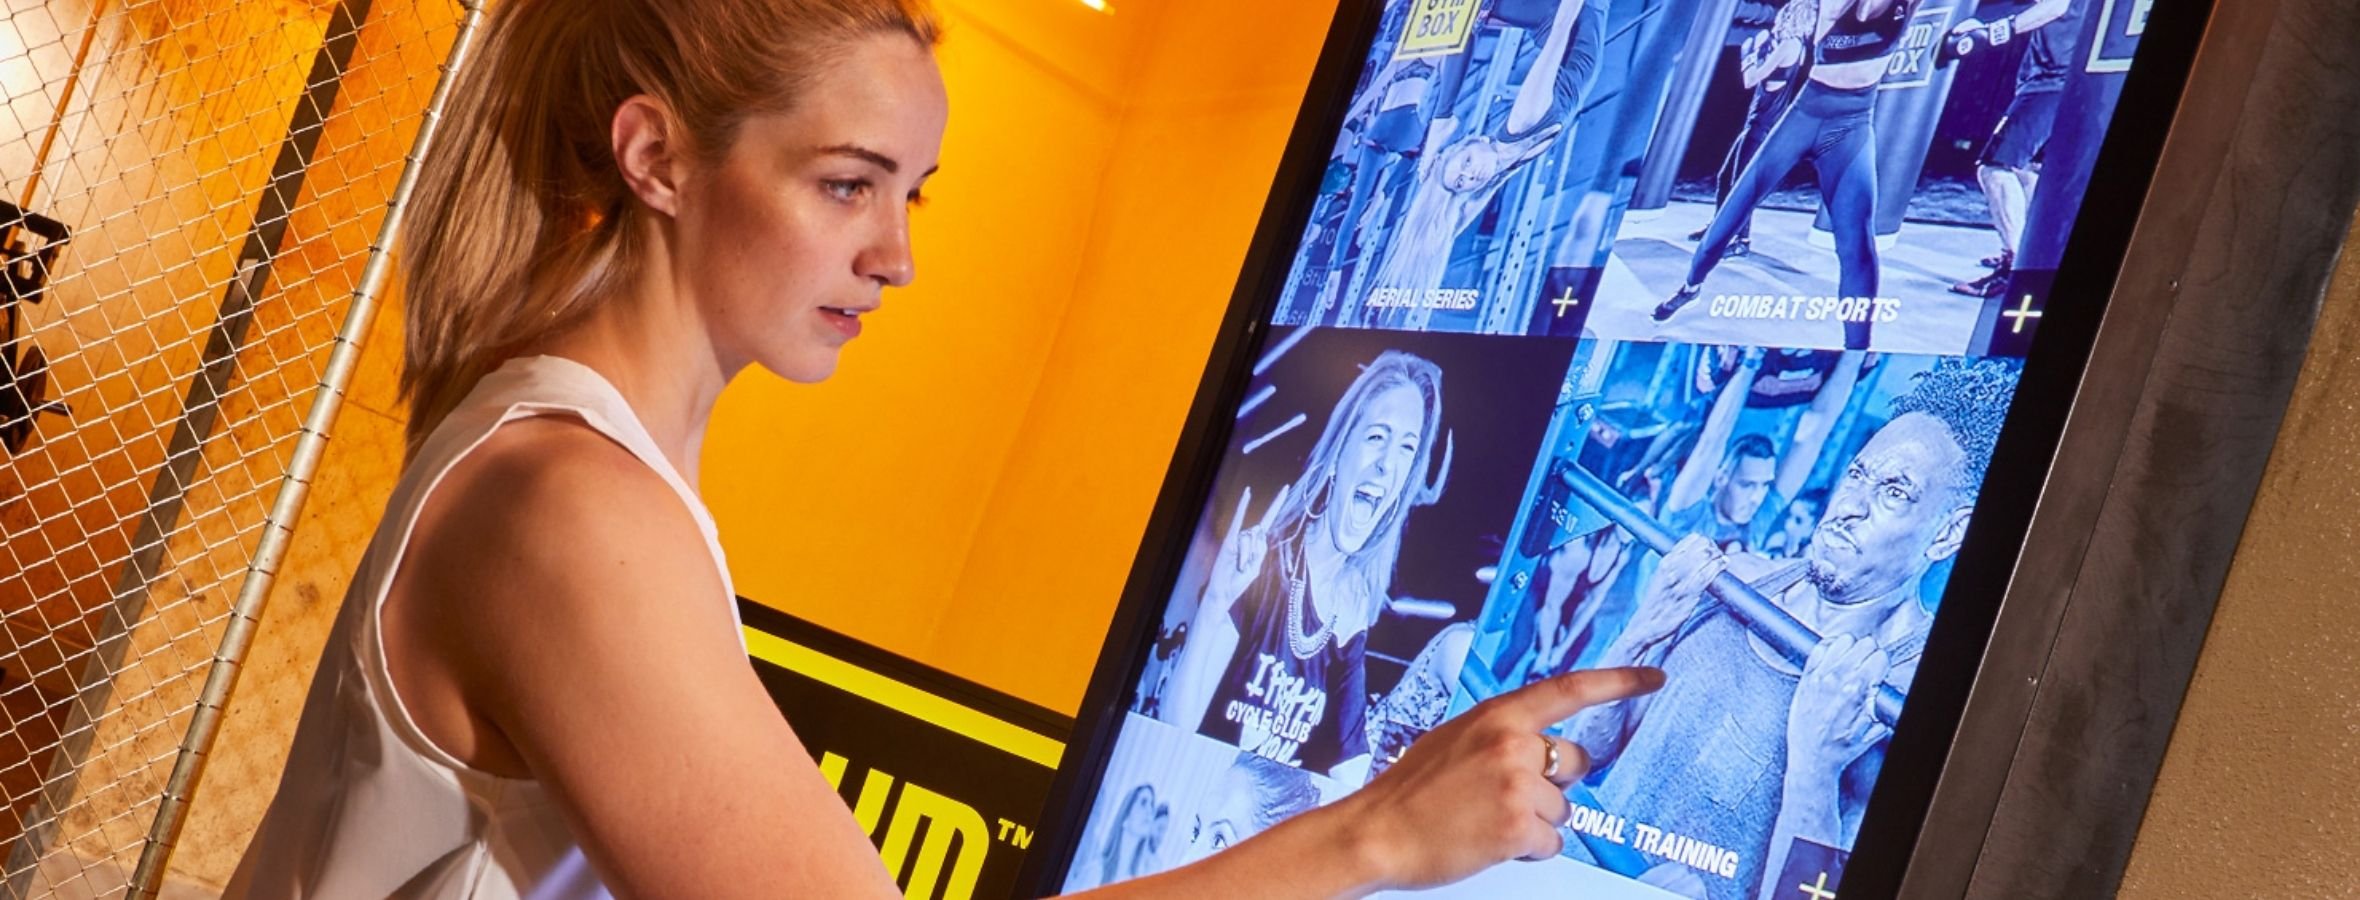 A woman selecting a virtual class from an on demand touchscreen TV